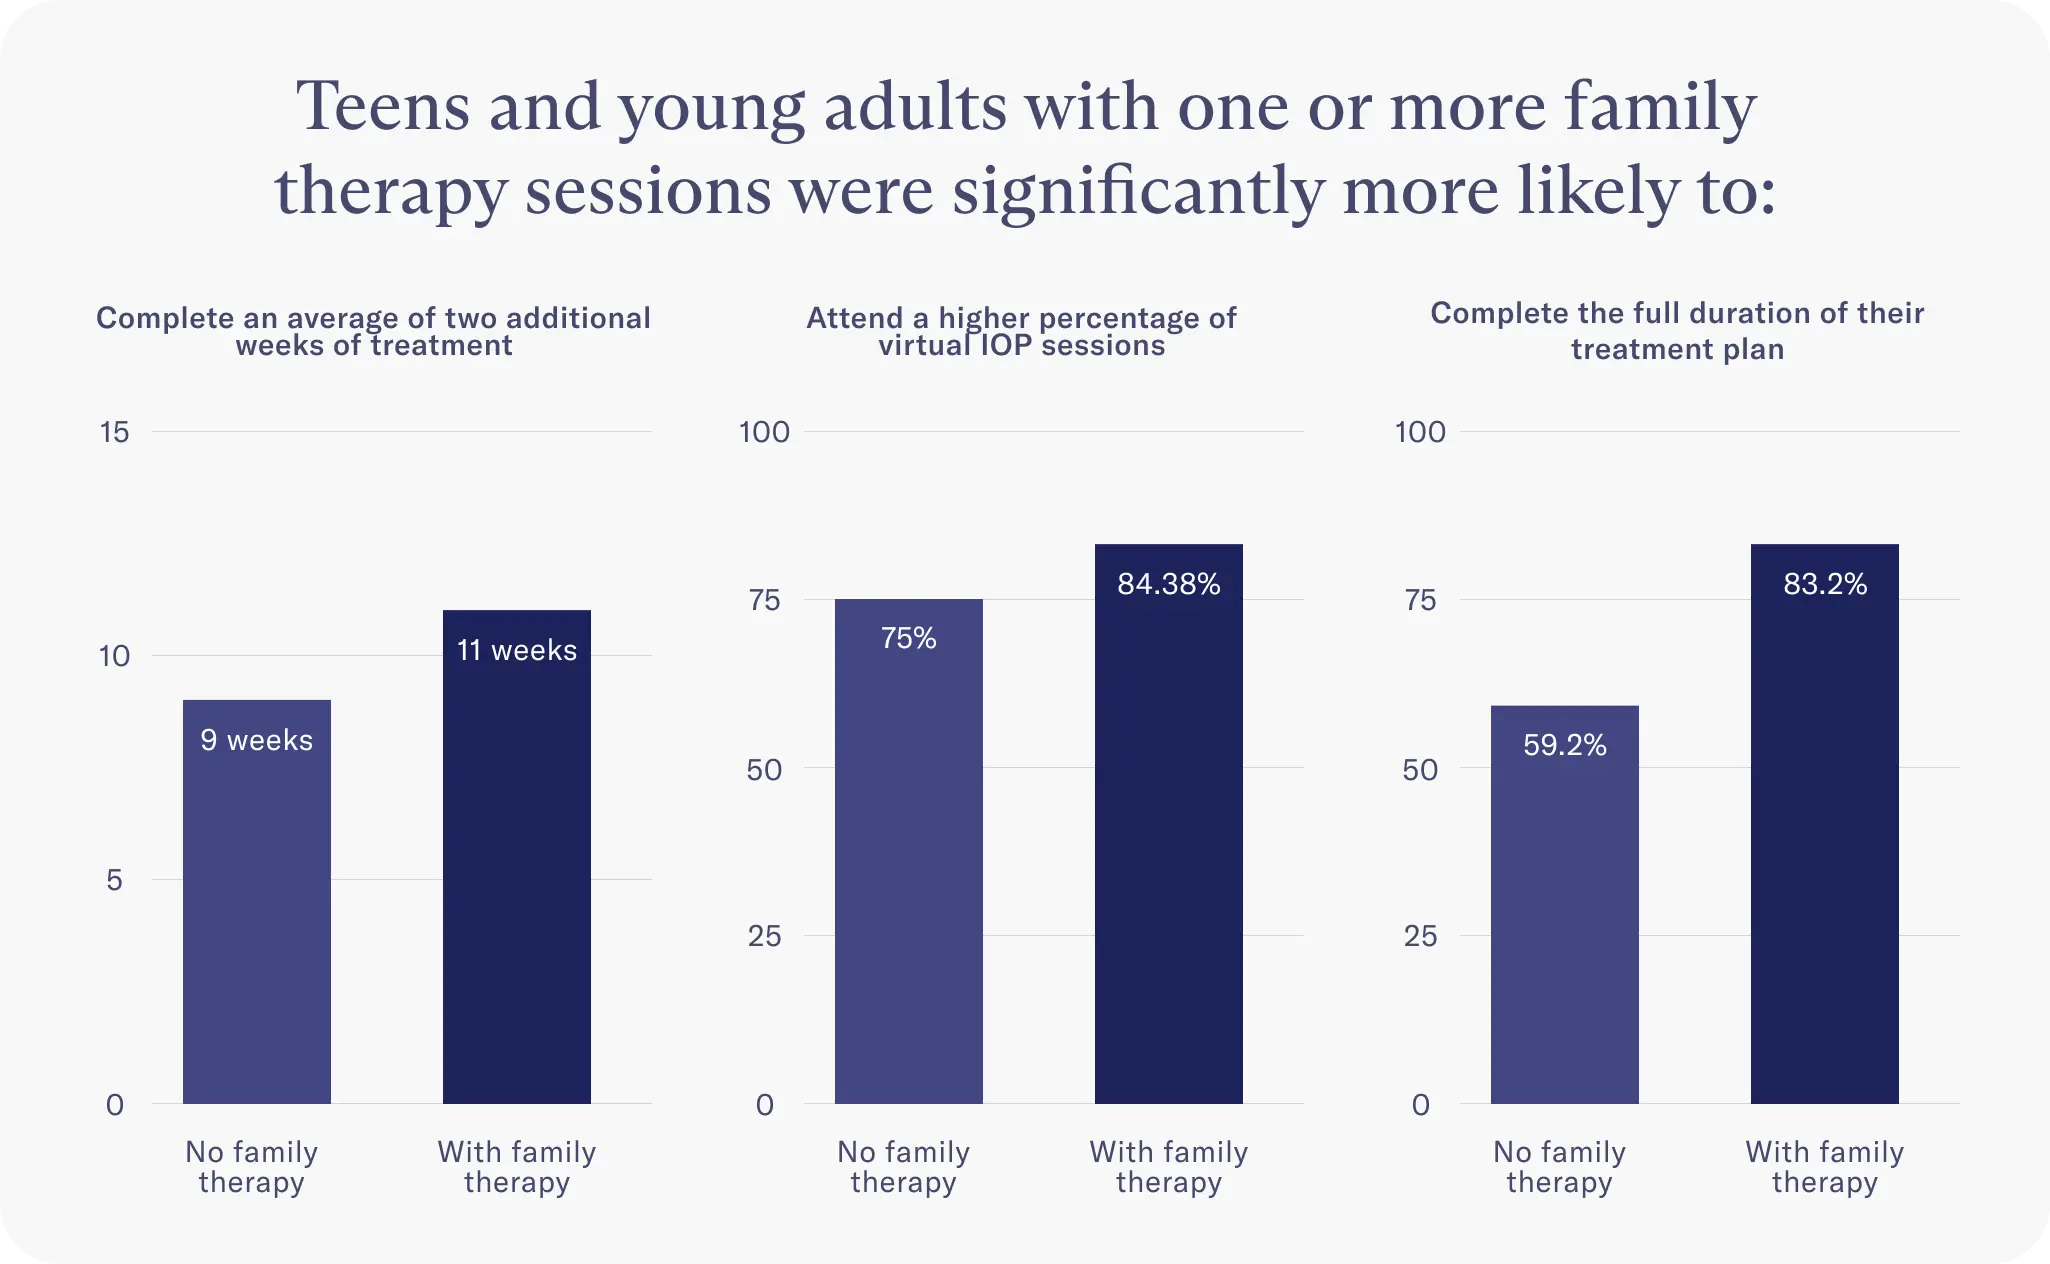 Graphs showing that teens and young adults with one or more family therapy sessions were significantly more likely to complete an average of two additional weeks of treatment, attend a higher percentage of virtual IOP sessions, and complete the full duration of their treatment plan